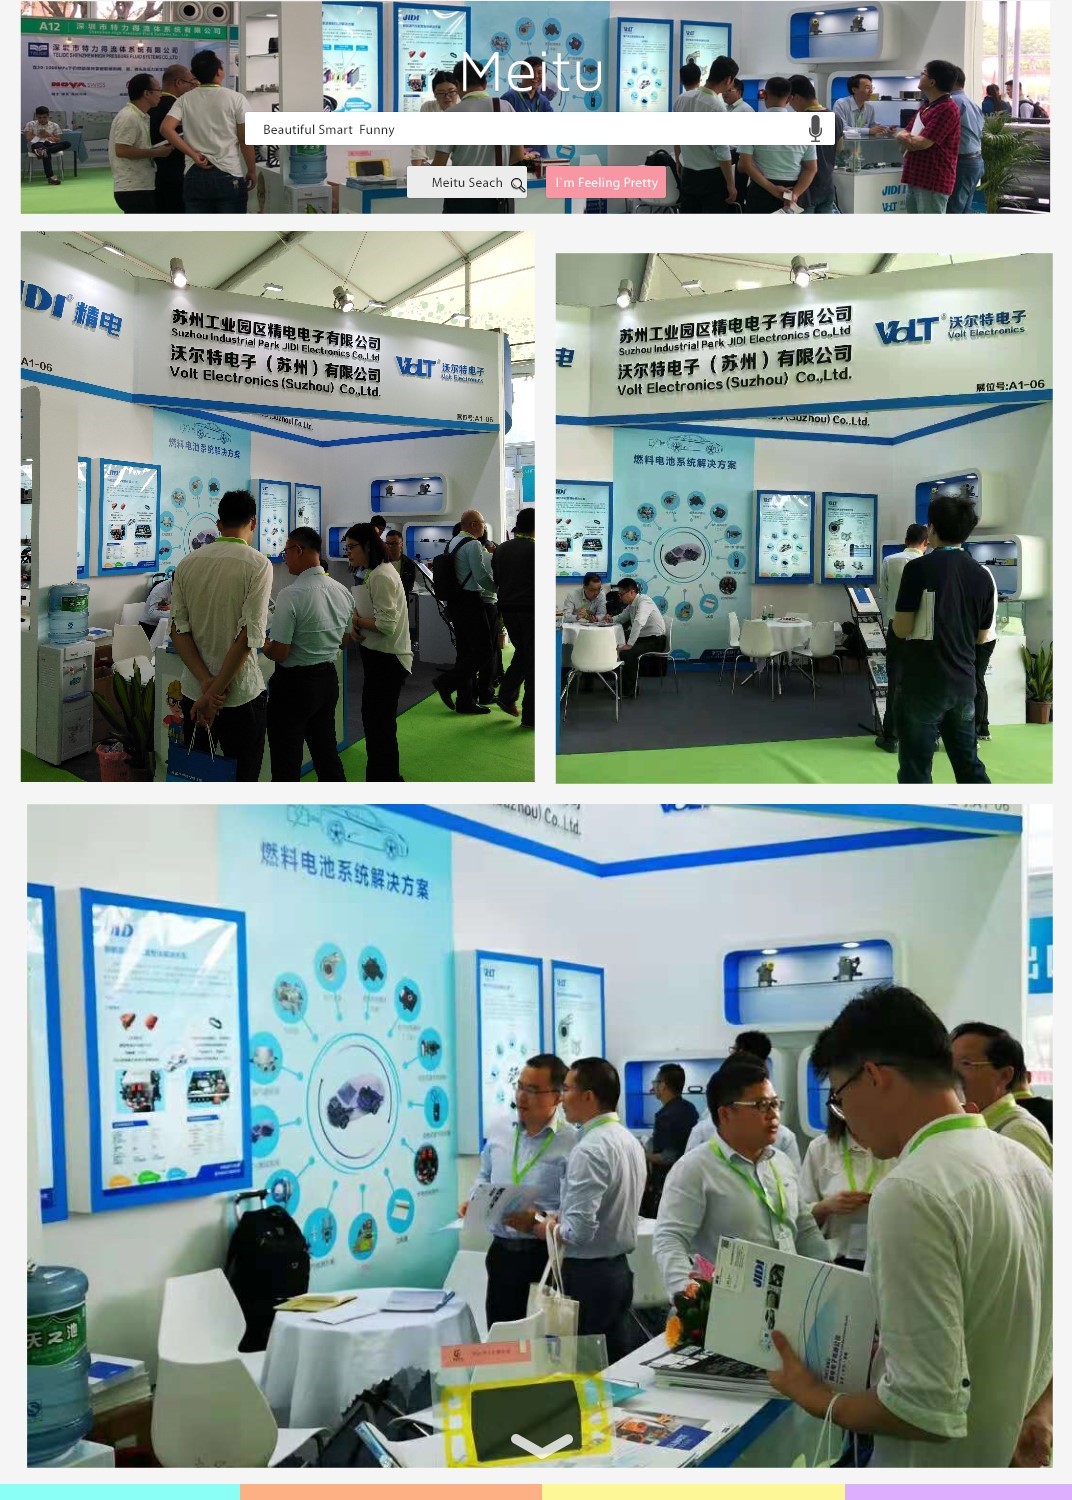 Foshan International Hydrogen Energy and Fuel Cell Technology Product Promotion Conference